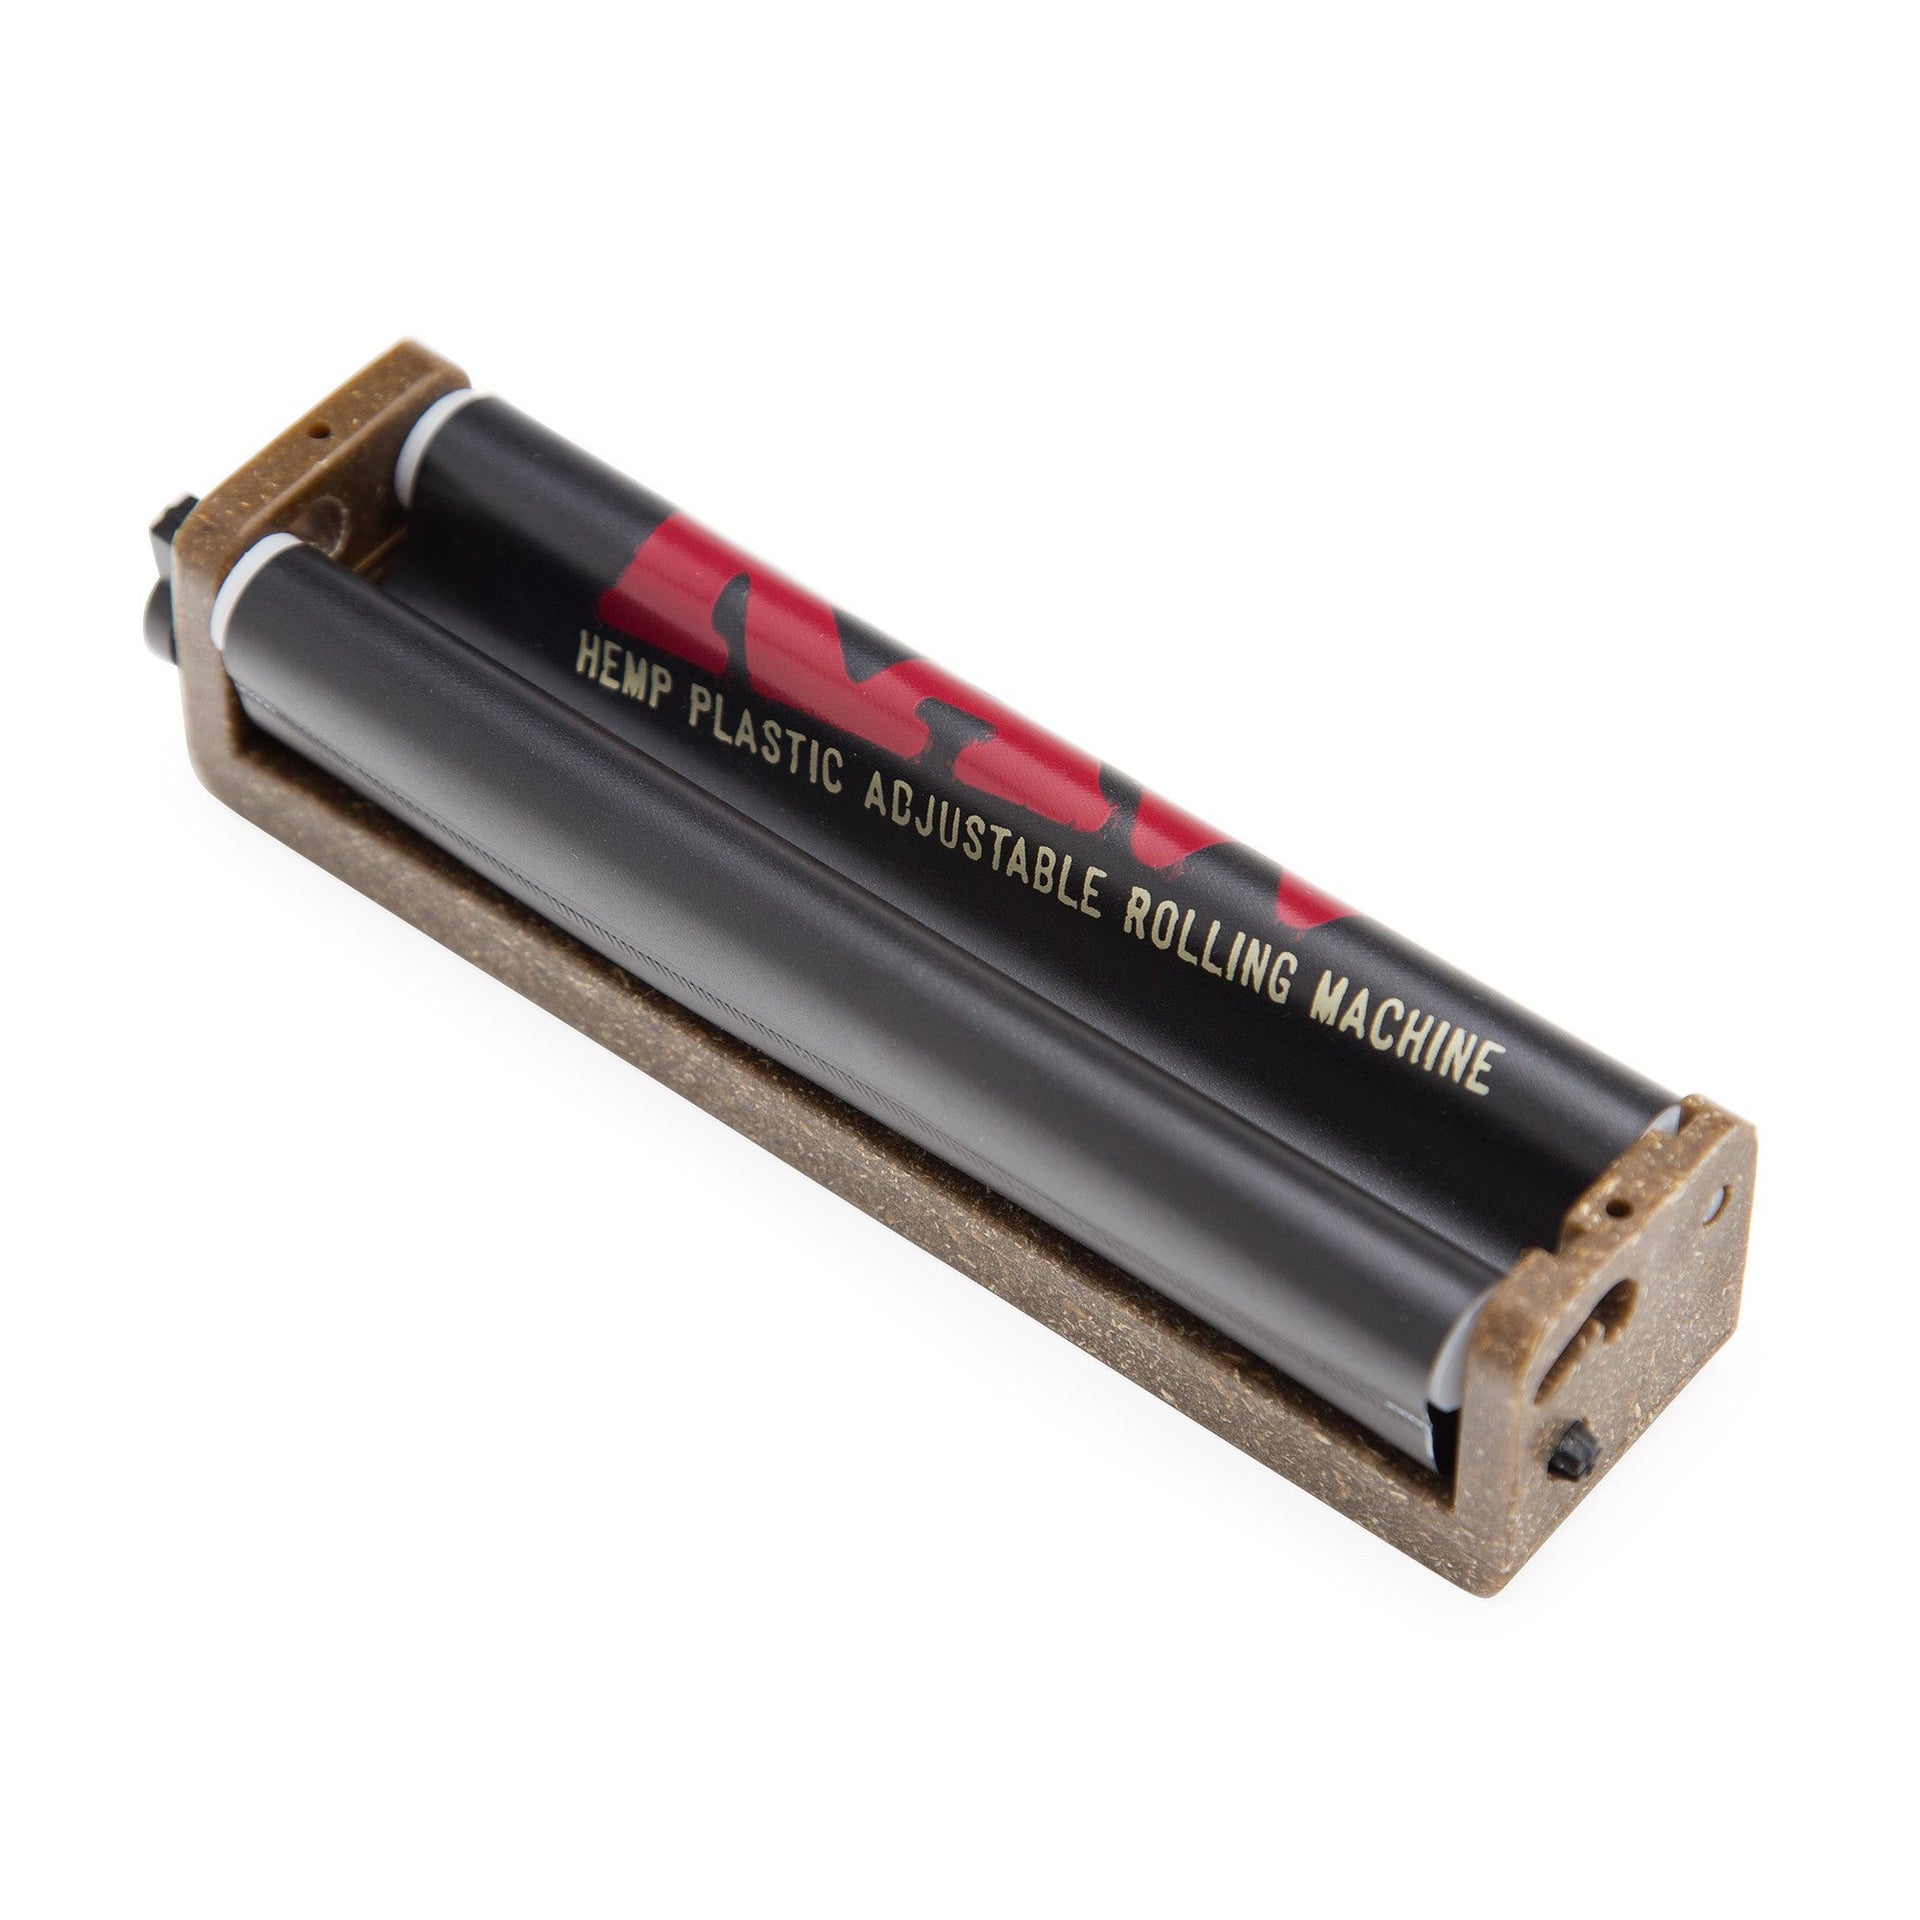 RAW 110mm 2-Way Adjustable Roller - 420 Science - The most trusted online smoke shop.